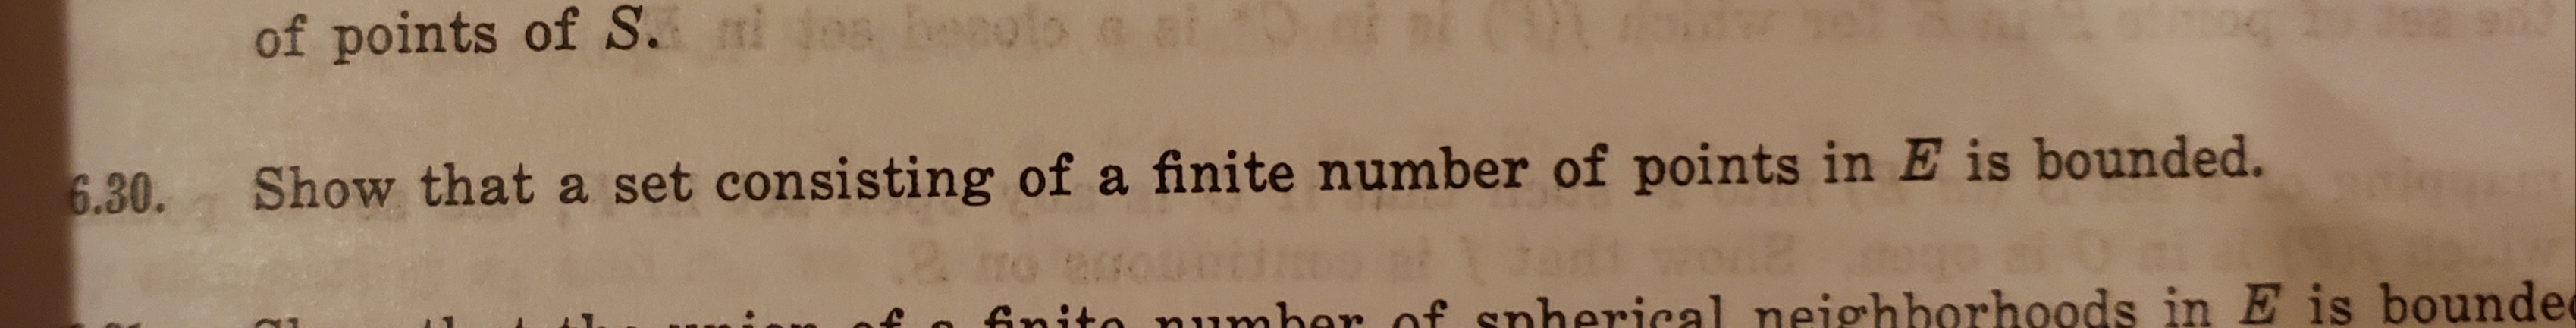 of points of S.
6.30
Show that a set consisting of a finite number of points in E is bounded.
Gnita numher of snherical neighhorhoods in E is bounde
